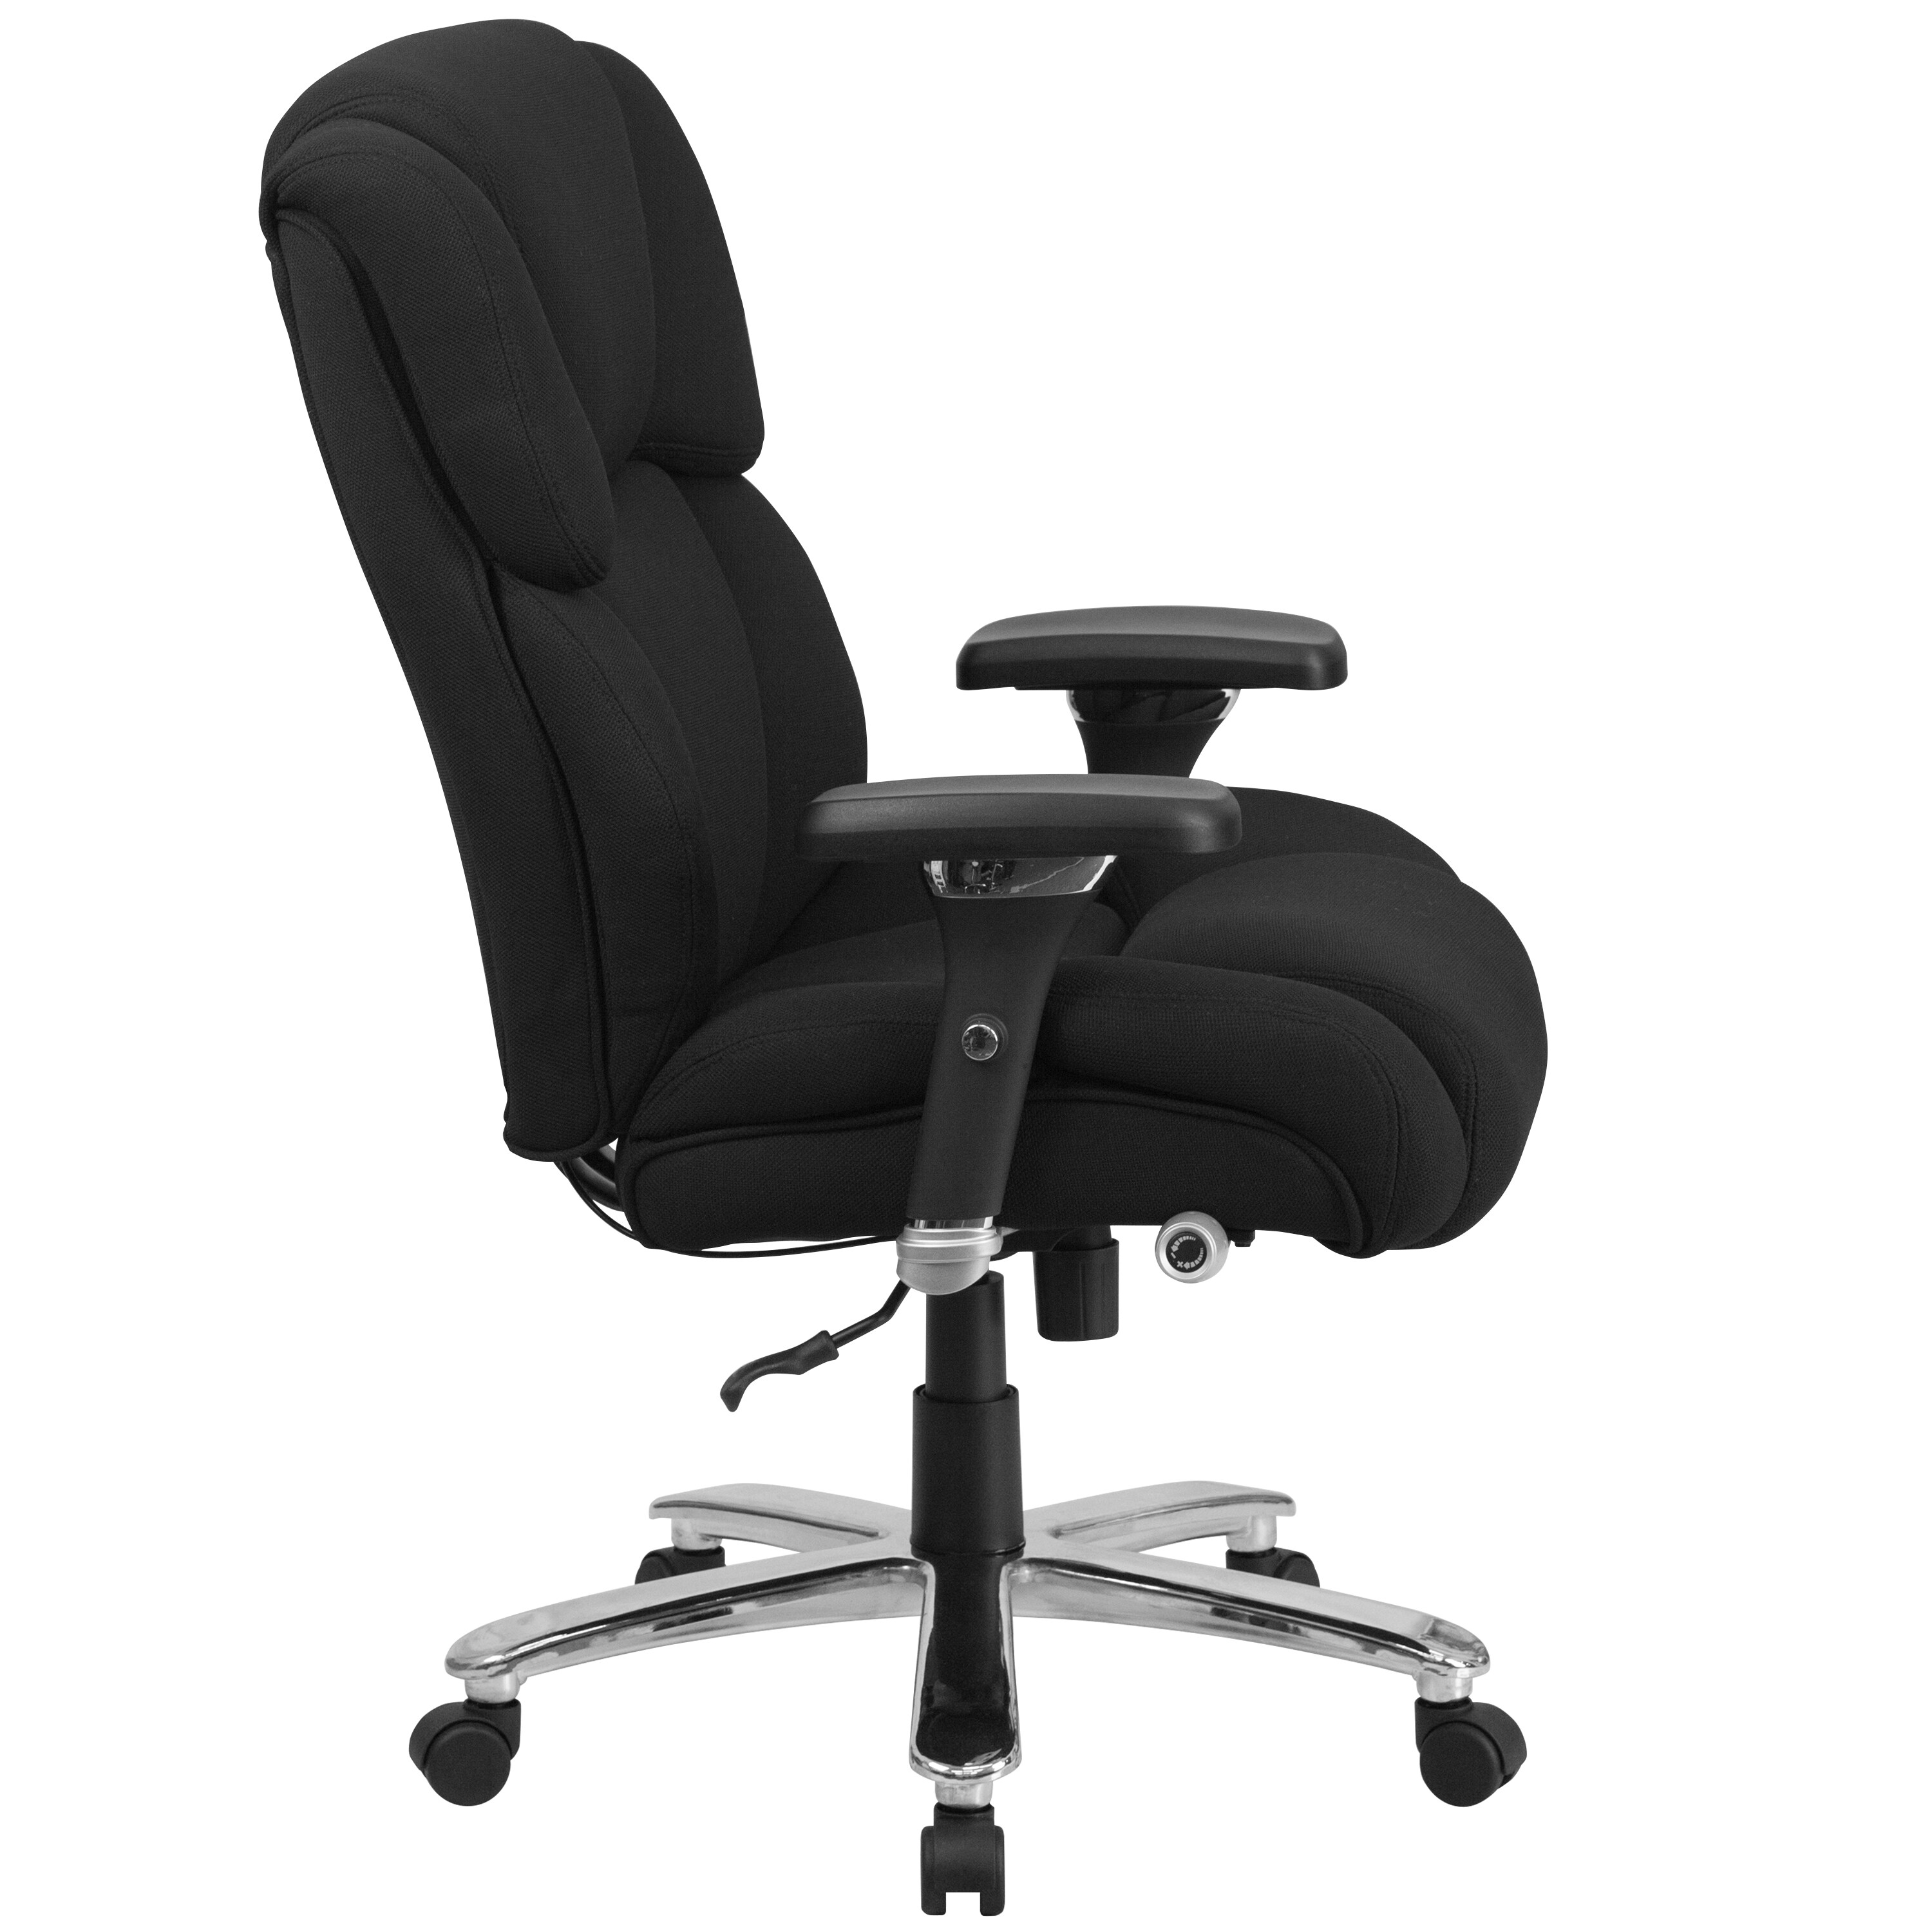 Executive Office Chair Wide Padded Seat High Back Swivel Adjustable White Black 